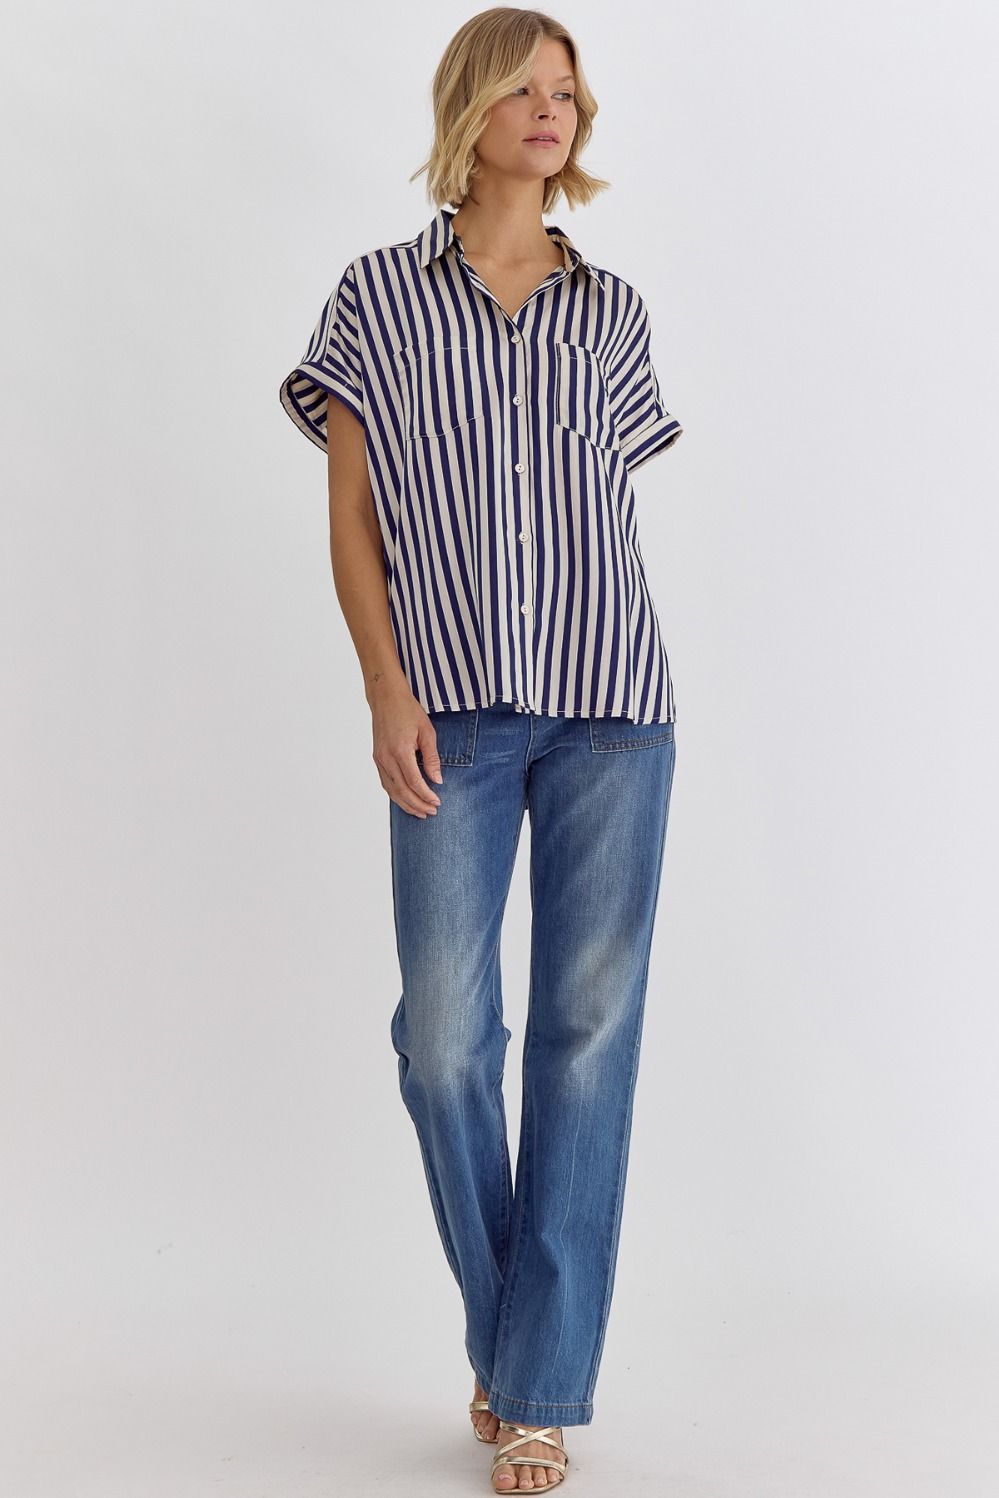 Shelbie Striped Top (Navy)